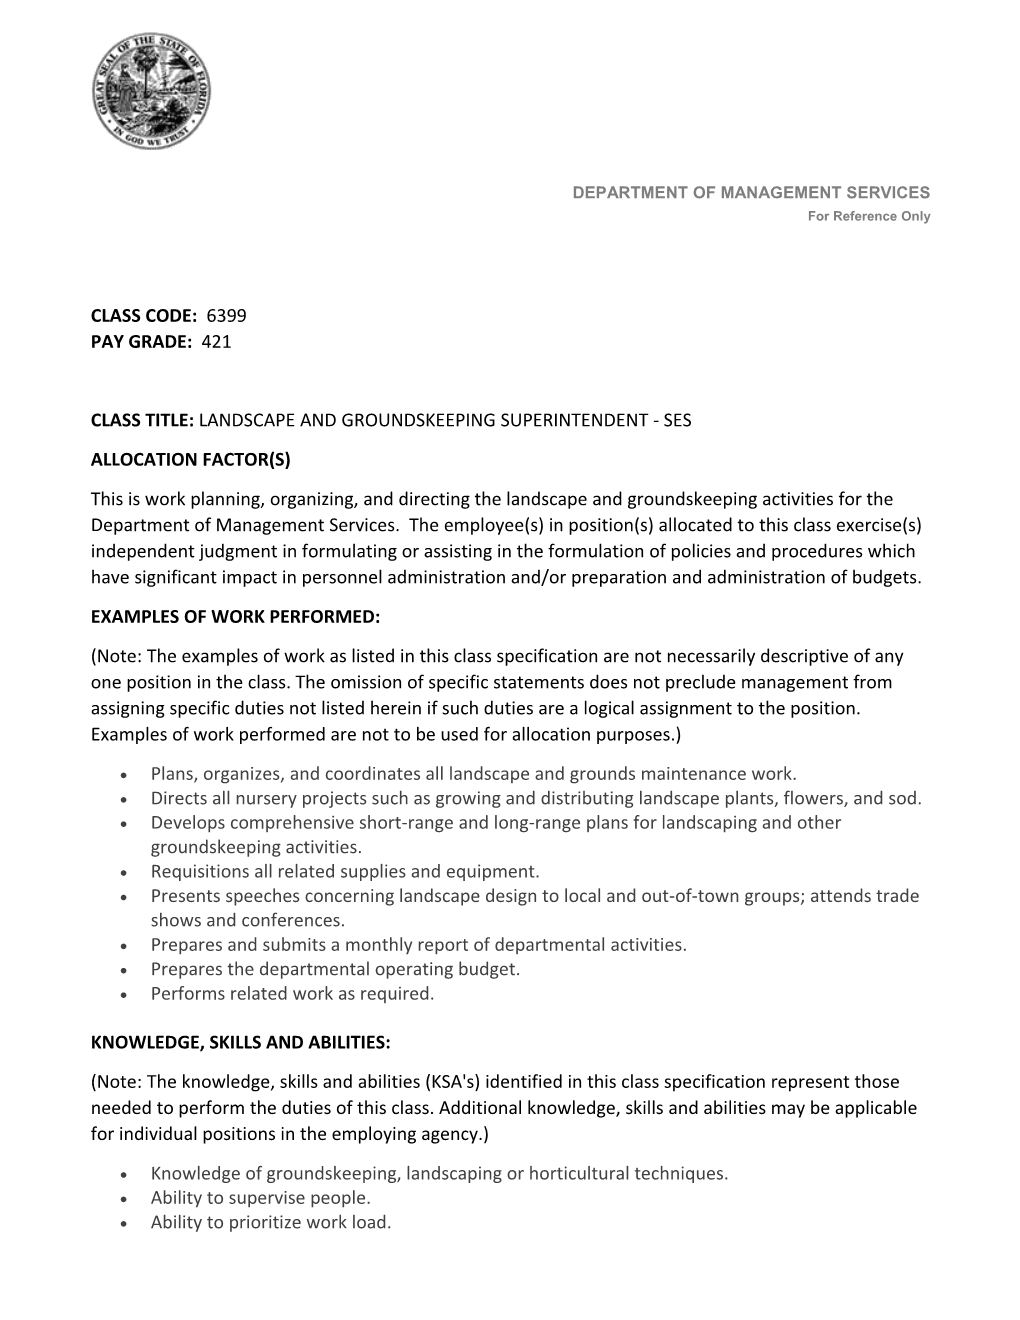 Class Title:Landscape and Groundskeeping Superintendent - Ses